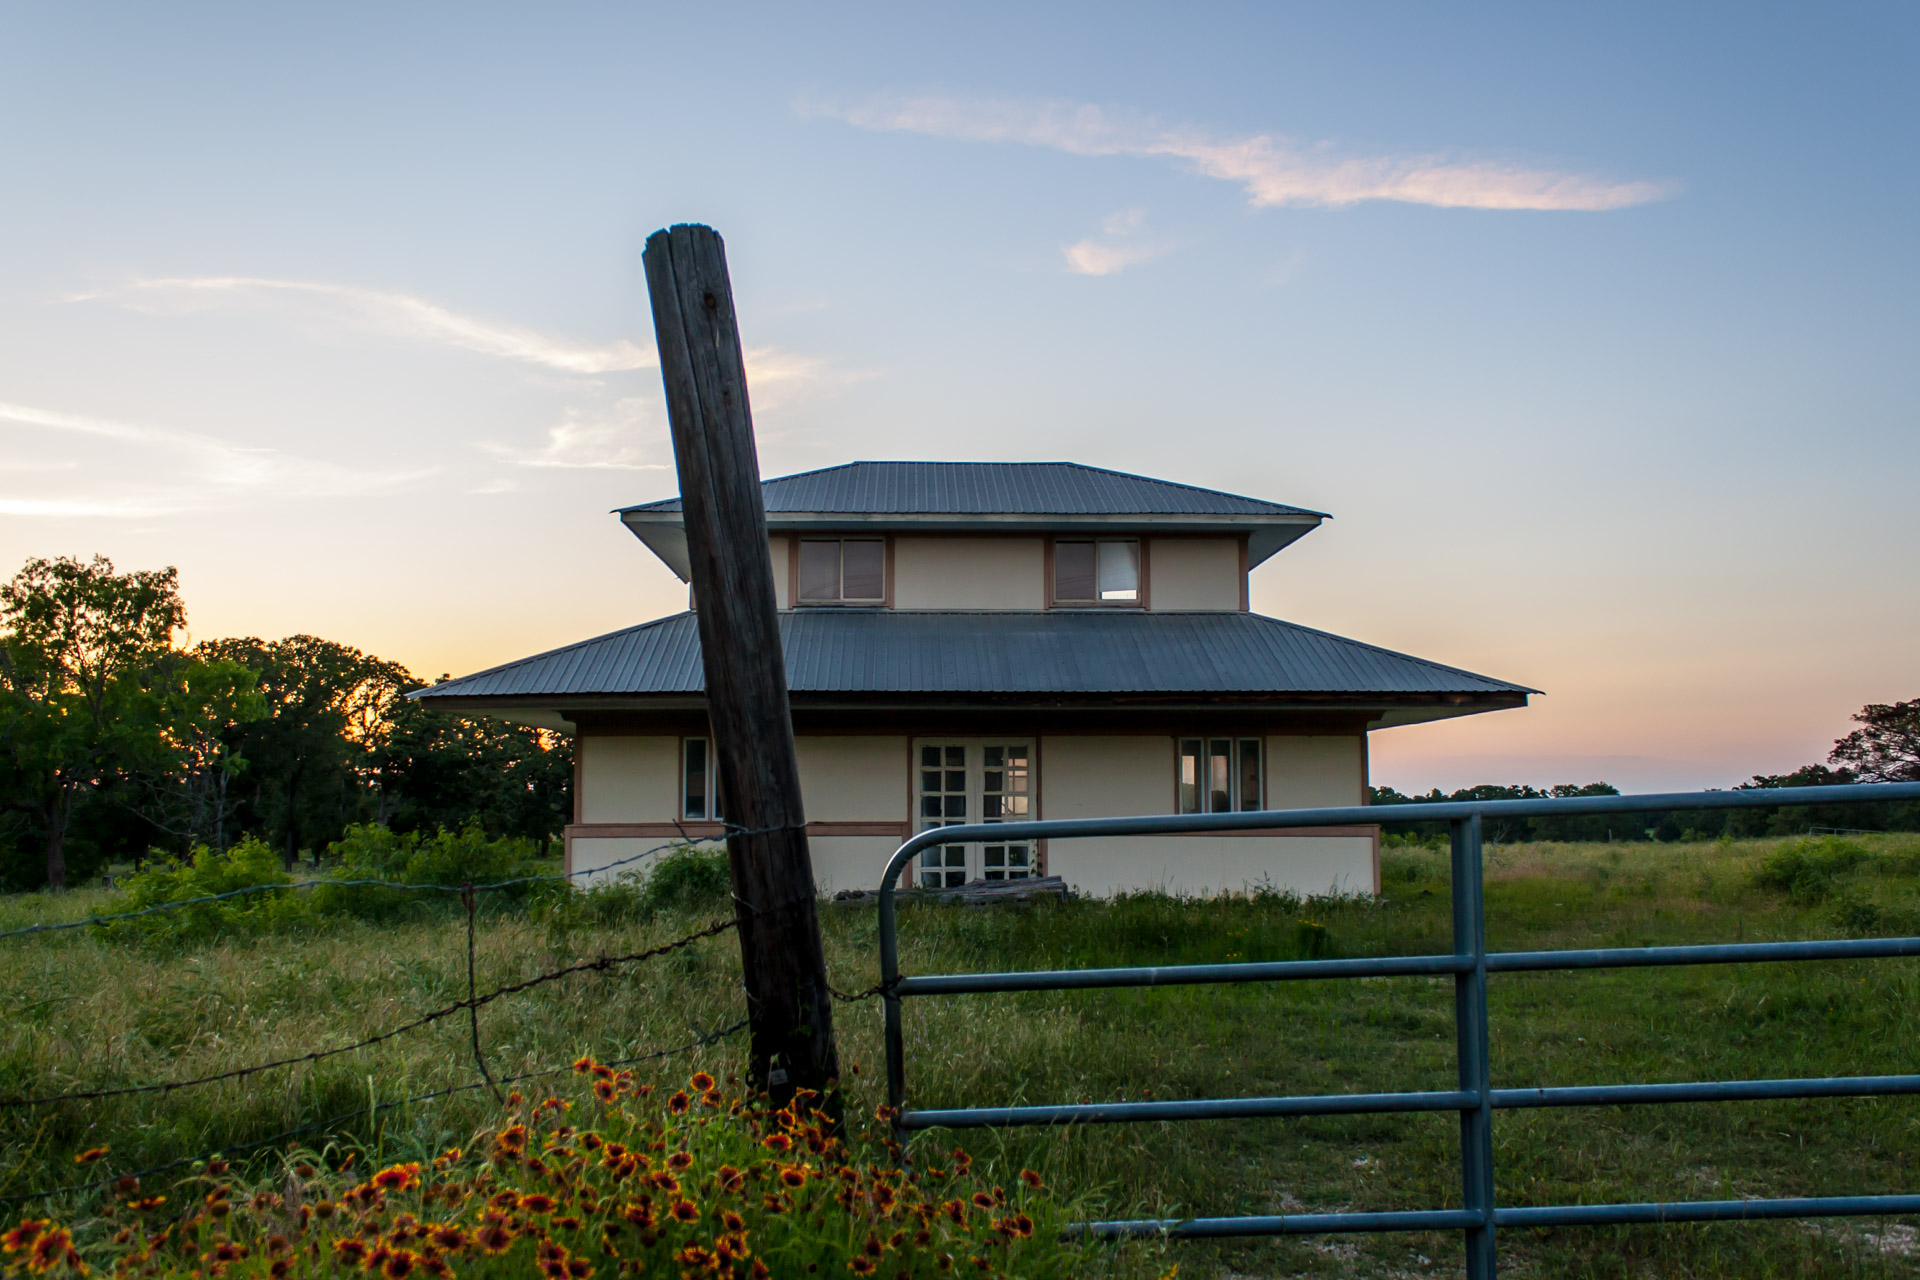 Dale, Texas - Sunset At A Tiered Roof House